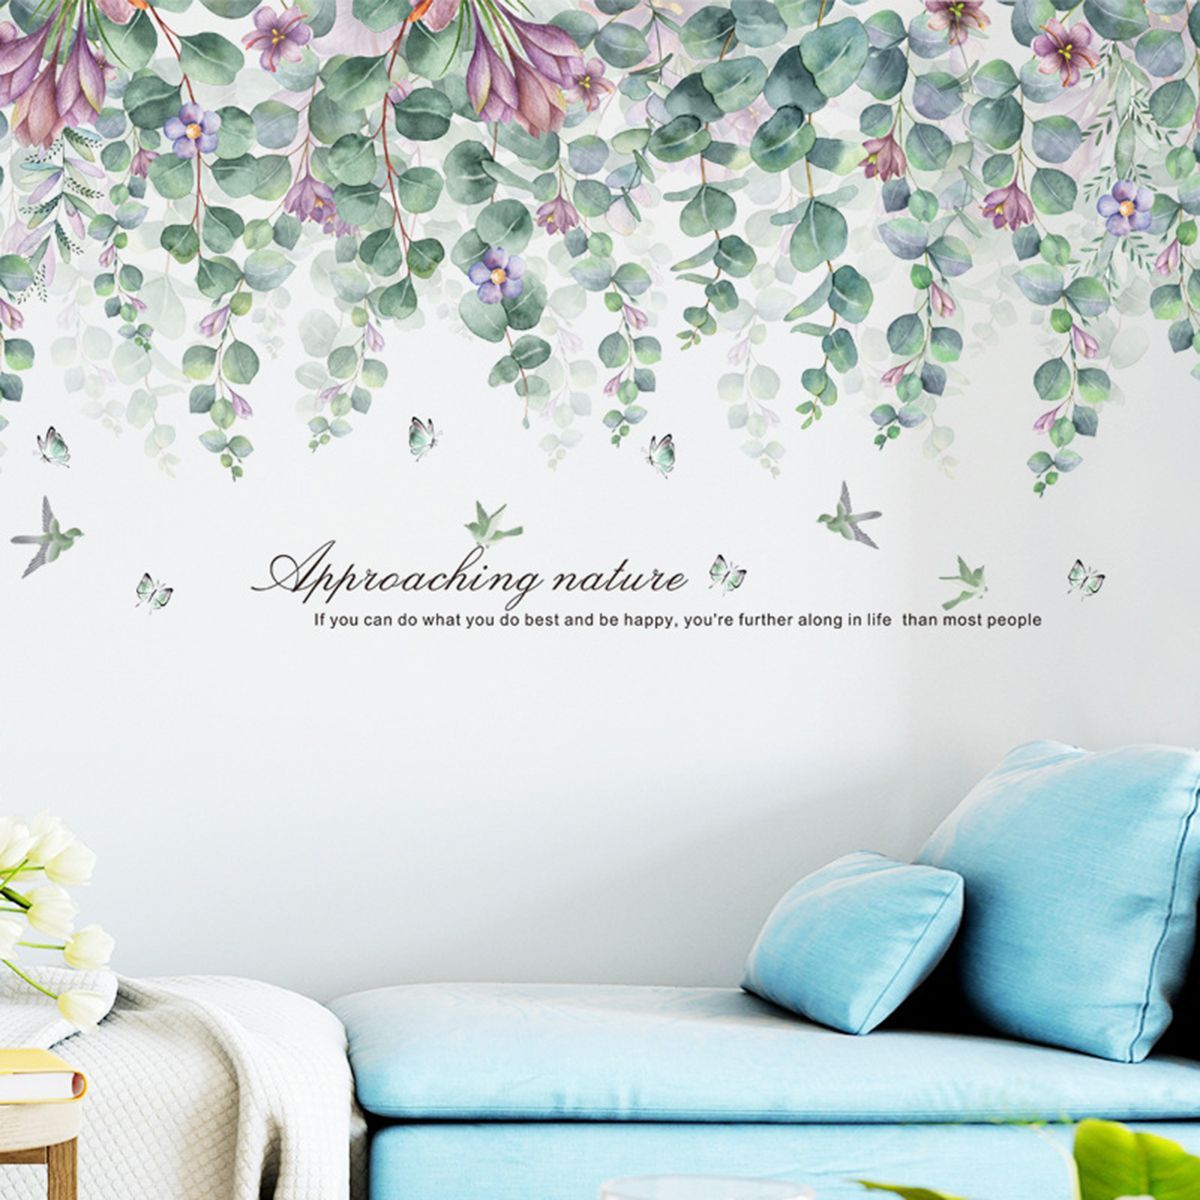 Tree-Branch-Leaves-Removable-Wall-Decal-PVC-Large-Sticker-Mural-Home-Decor-Art-1713629